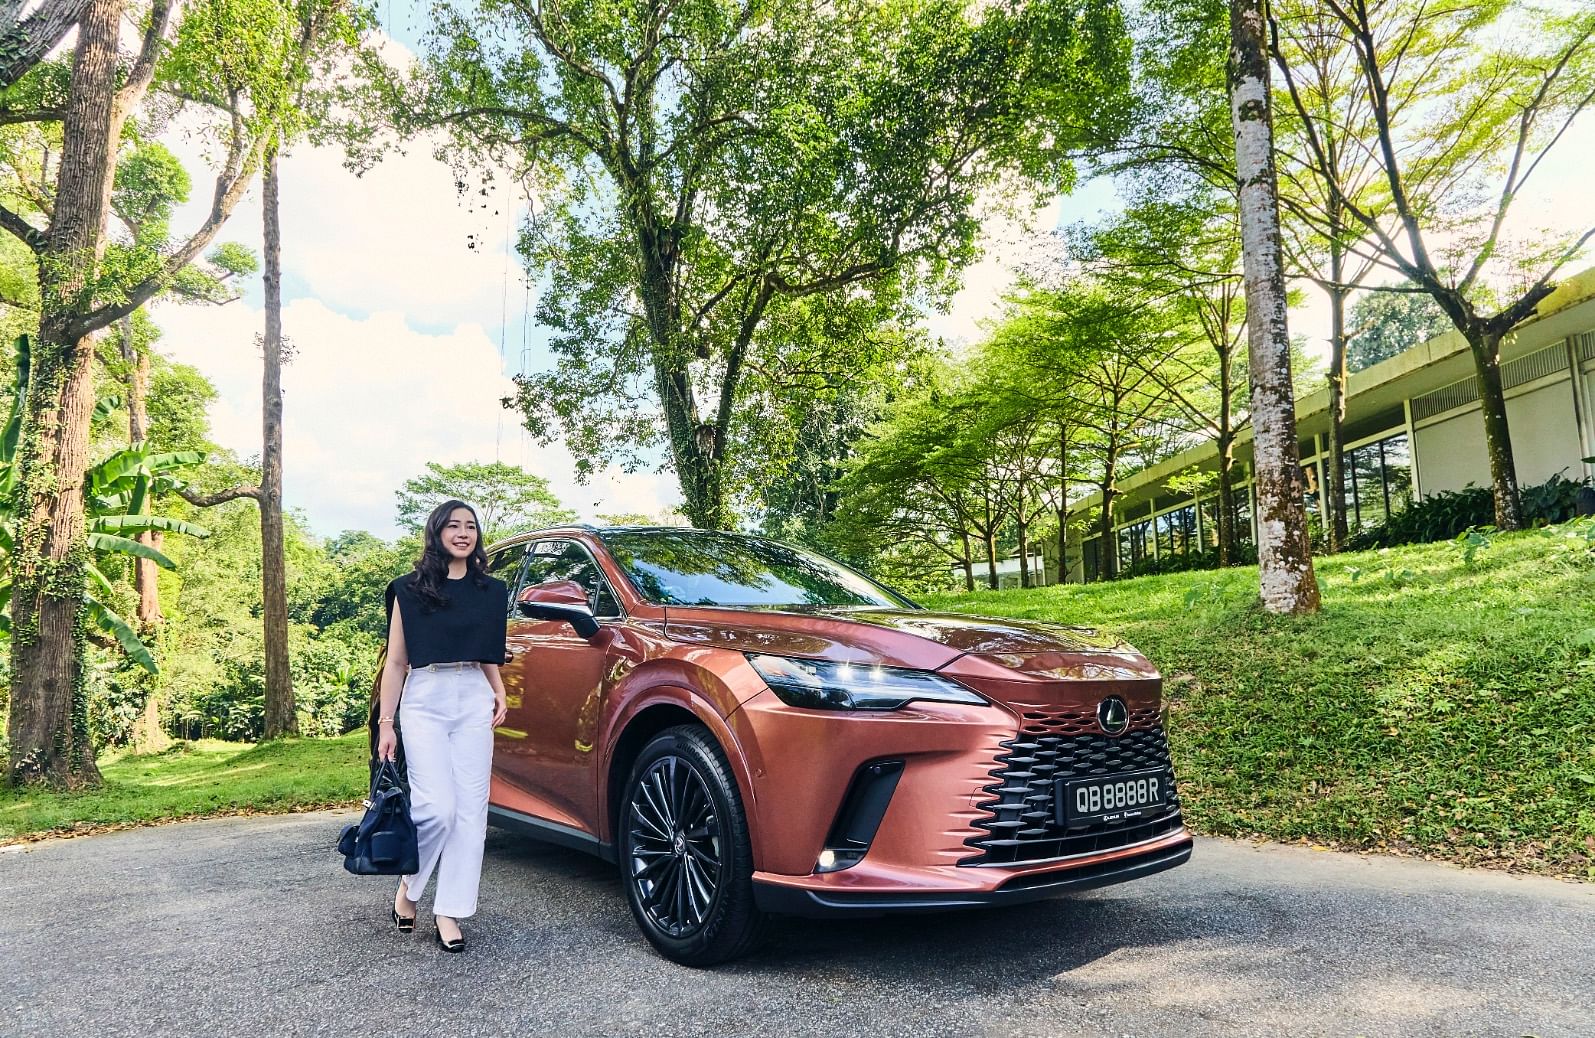 Kara Arissa Tan with the Lexus all-new RX 350h, which pairs a 2.5-litre inline-four engine with a powerful, self-charging electric motor to deliver 247 horsepower with high fuel efficiency of up to 17.8km/L.